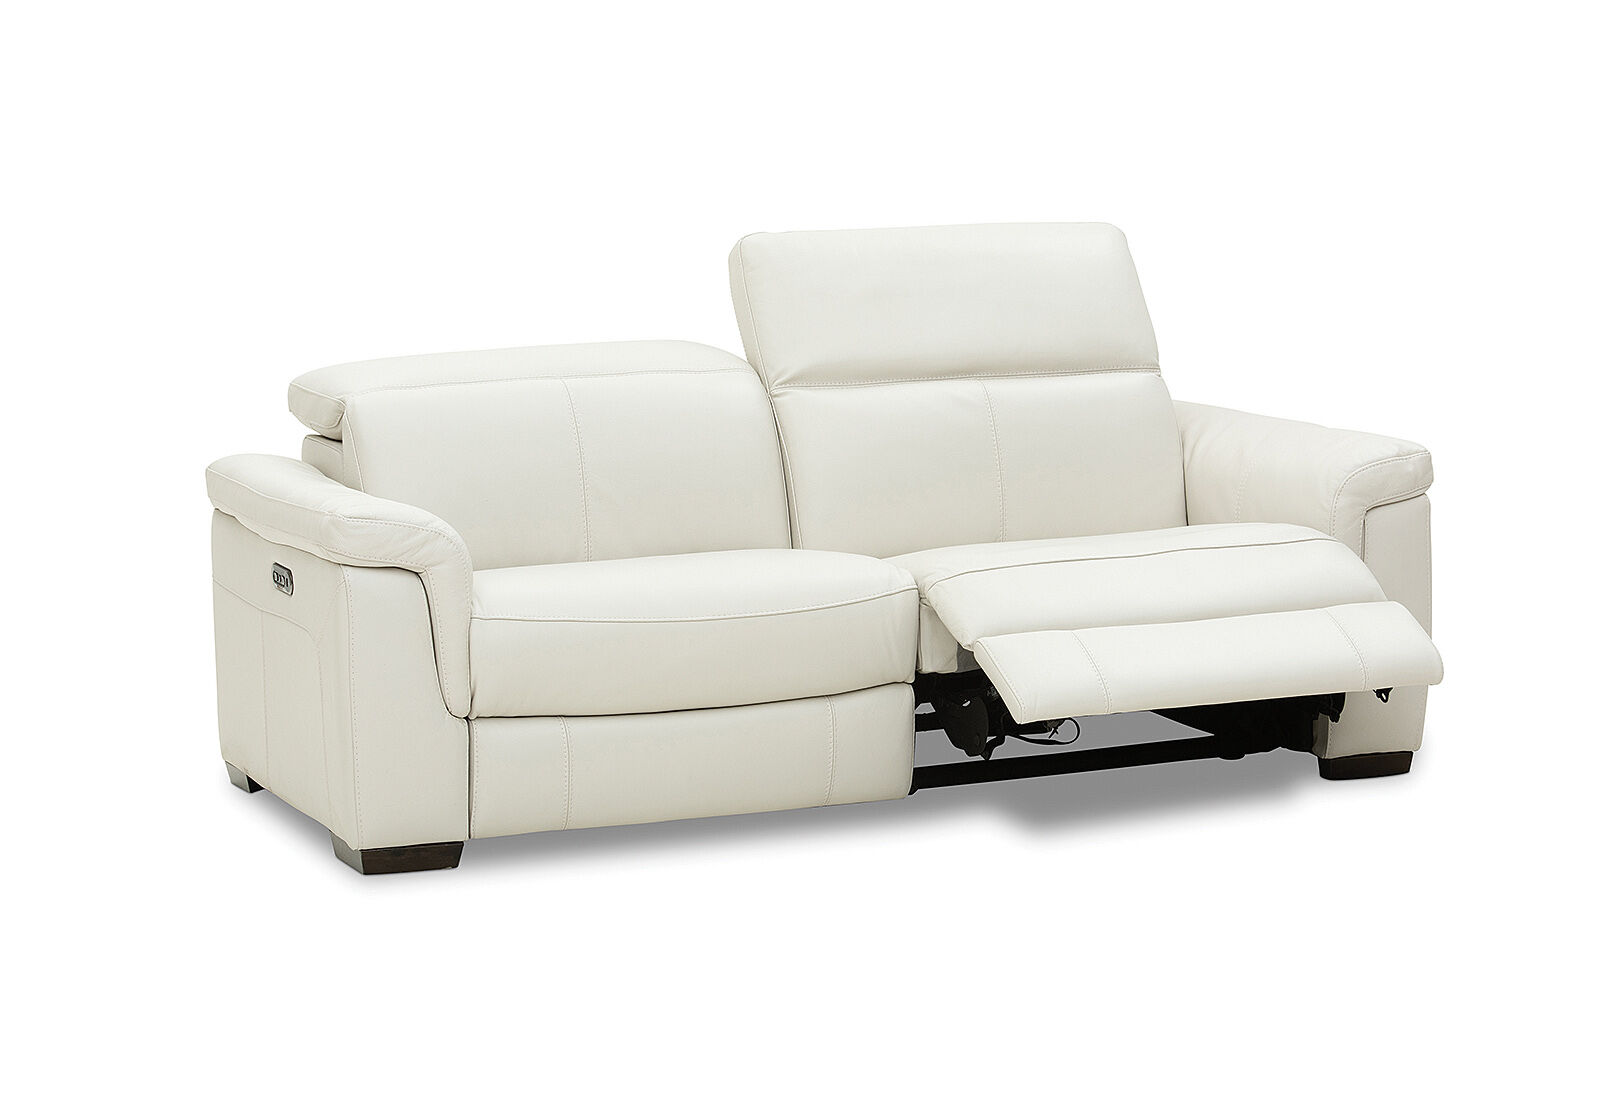 Beige Luciano Leather 2 5 Seater Sofa, Leather Sofa Electric Recliner